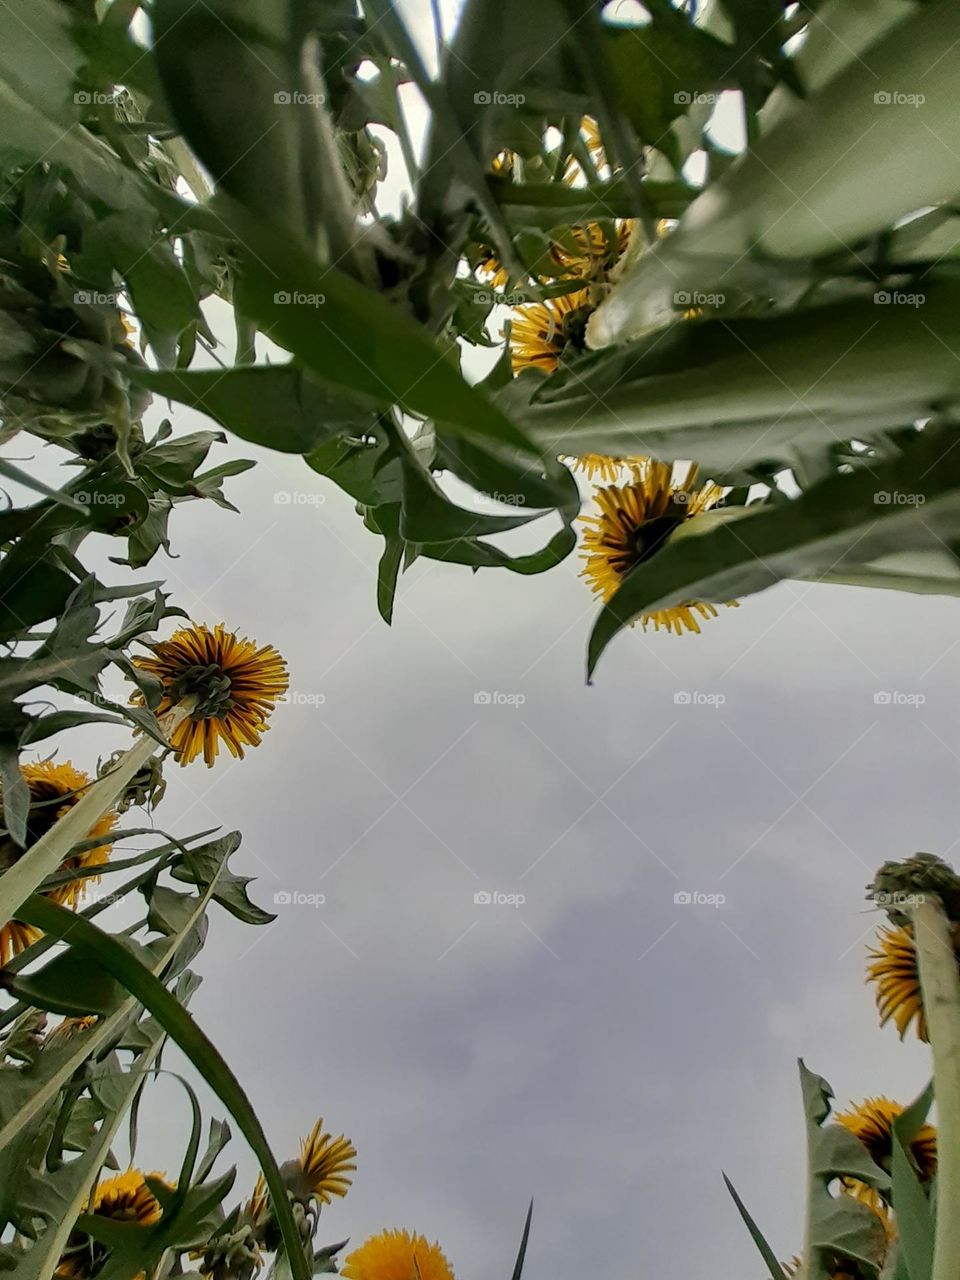 original photo of yellow dandelion buds and green grass against a gray, cloudy sky